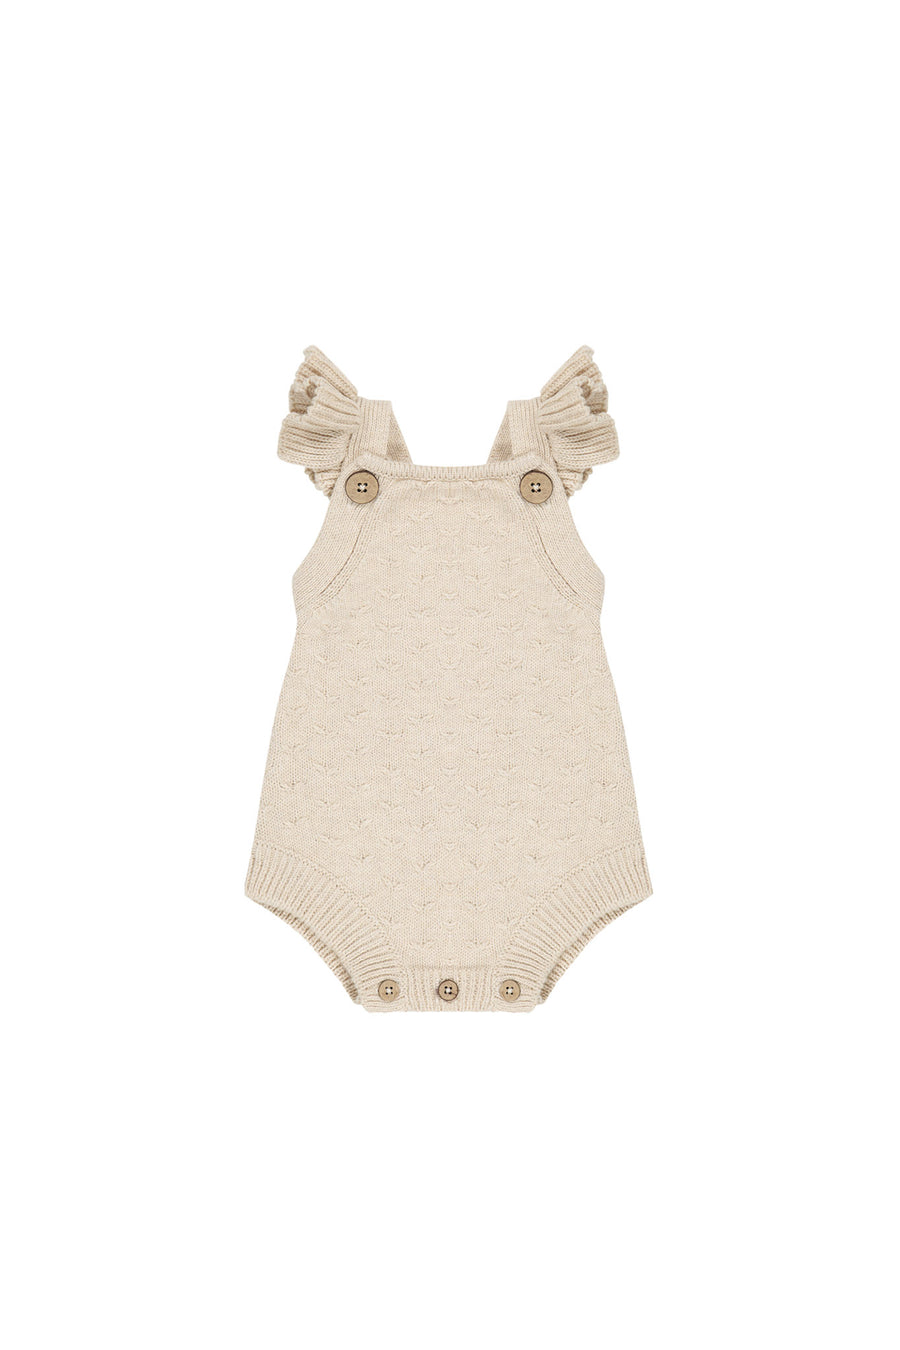 Mia Knitted Romper - Oatmeal Marle Childrens Romper from Jamie Kay NZ